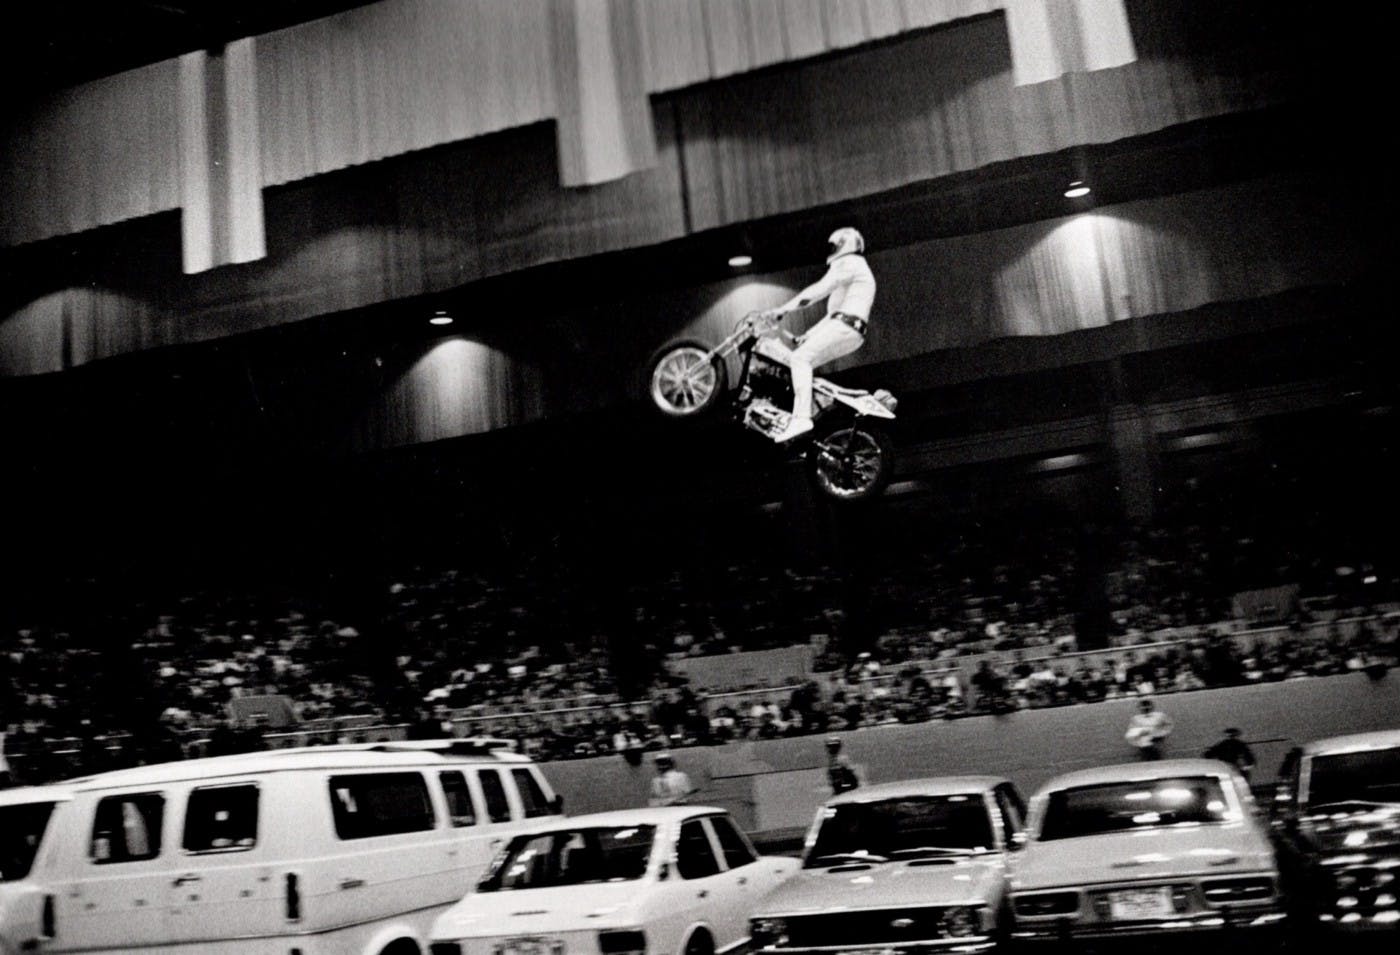 Evel Knievel jumps his motorcycle over a row of cars